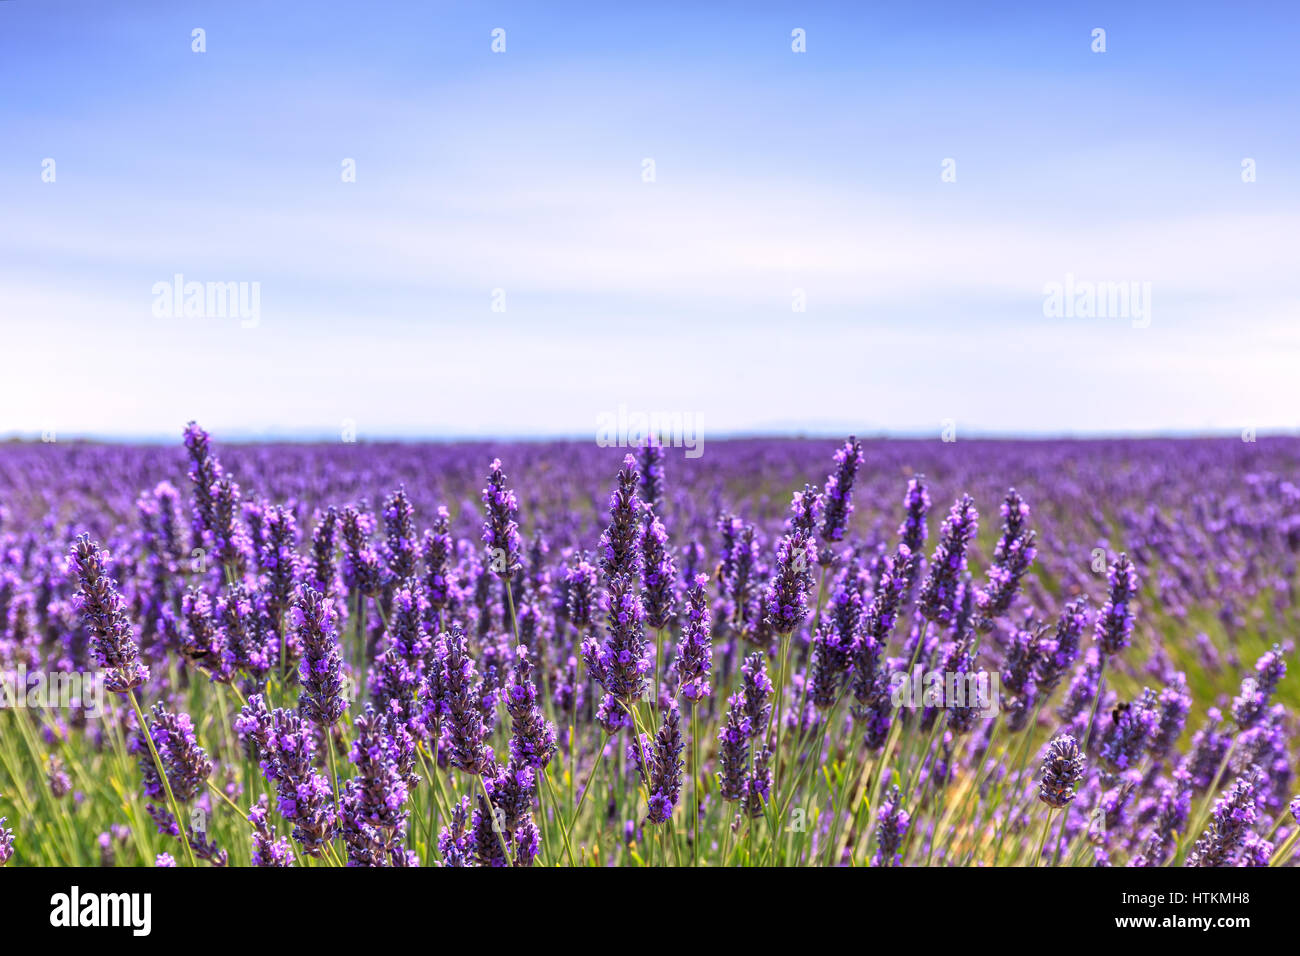 Lavender flower blooming scented fields in endless rows and a blue cloud sky. Landscape in Valensole plateau, Provence, France, Europe. Stock Photo